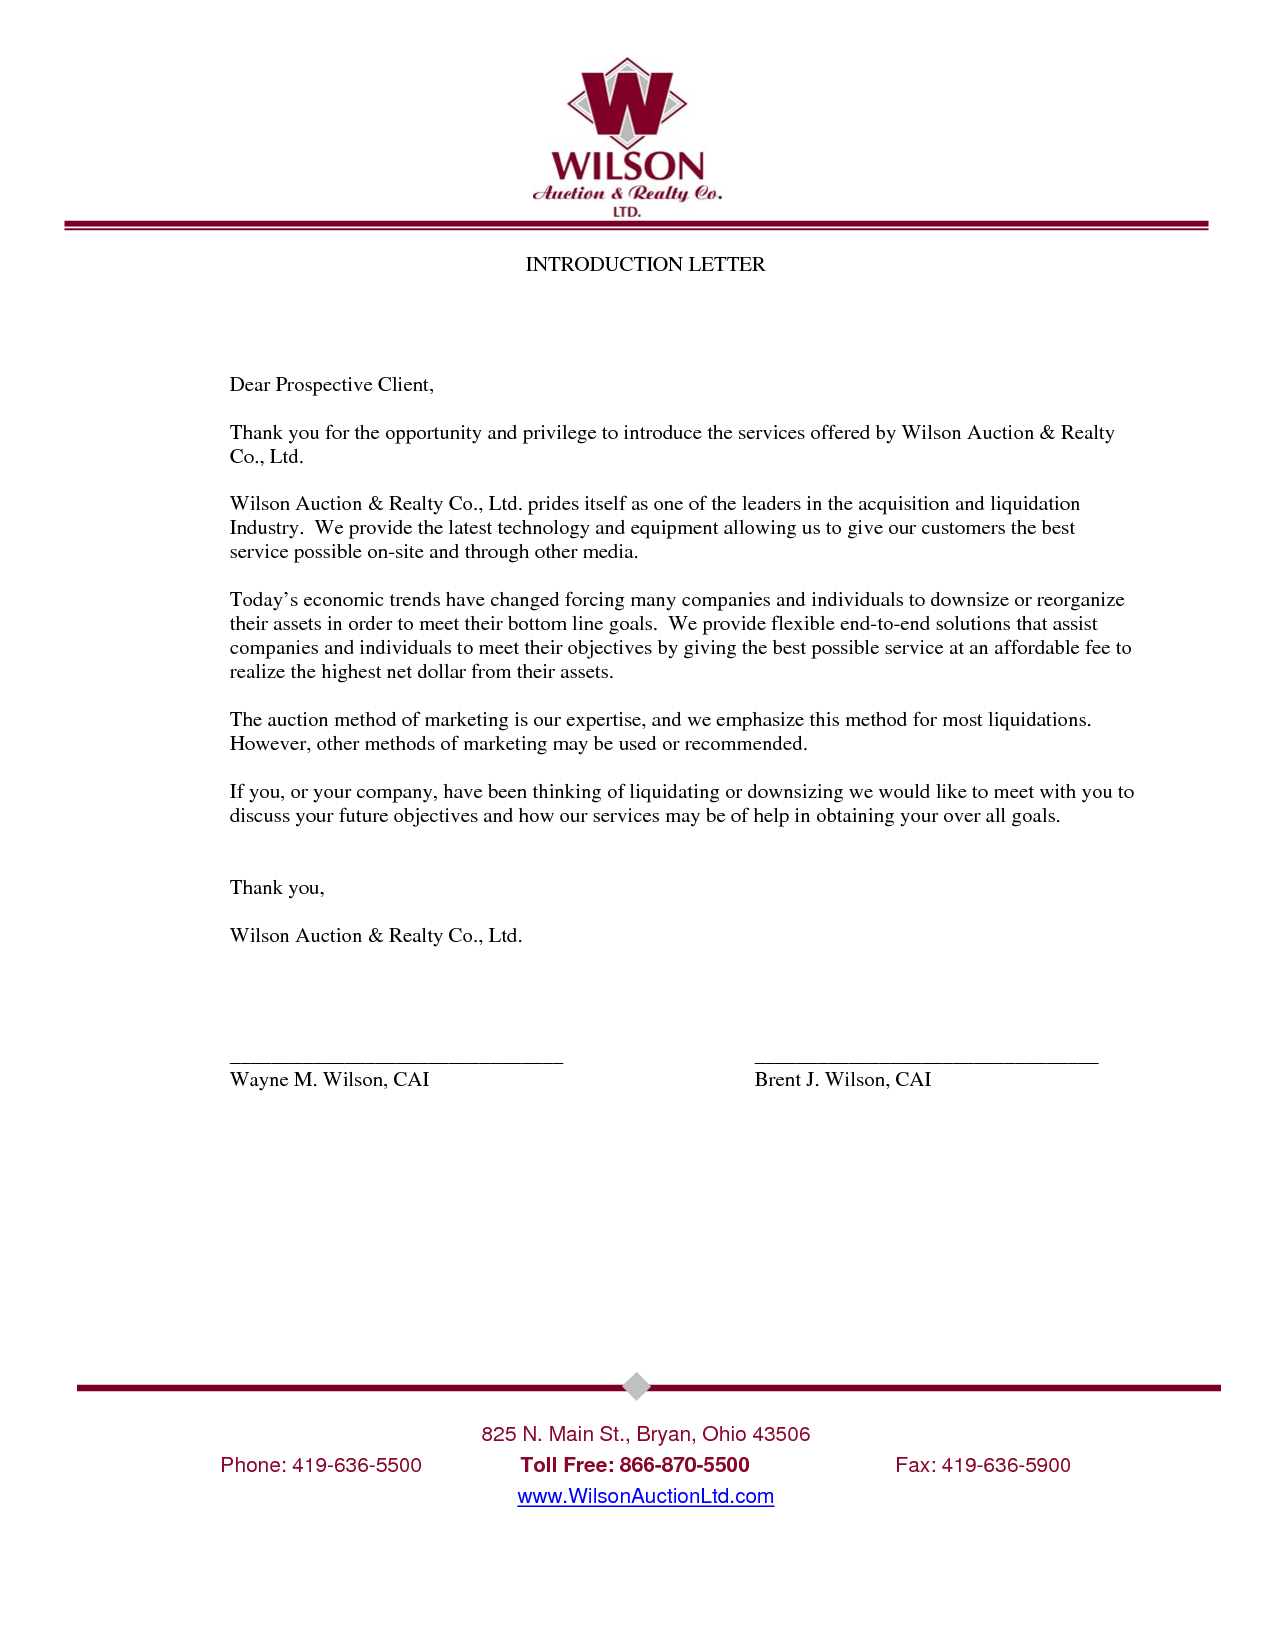 Introduction Letter To Prospective Client Template